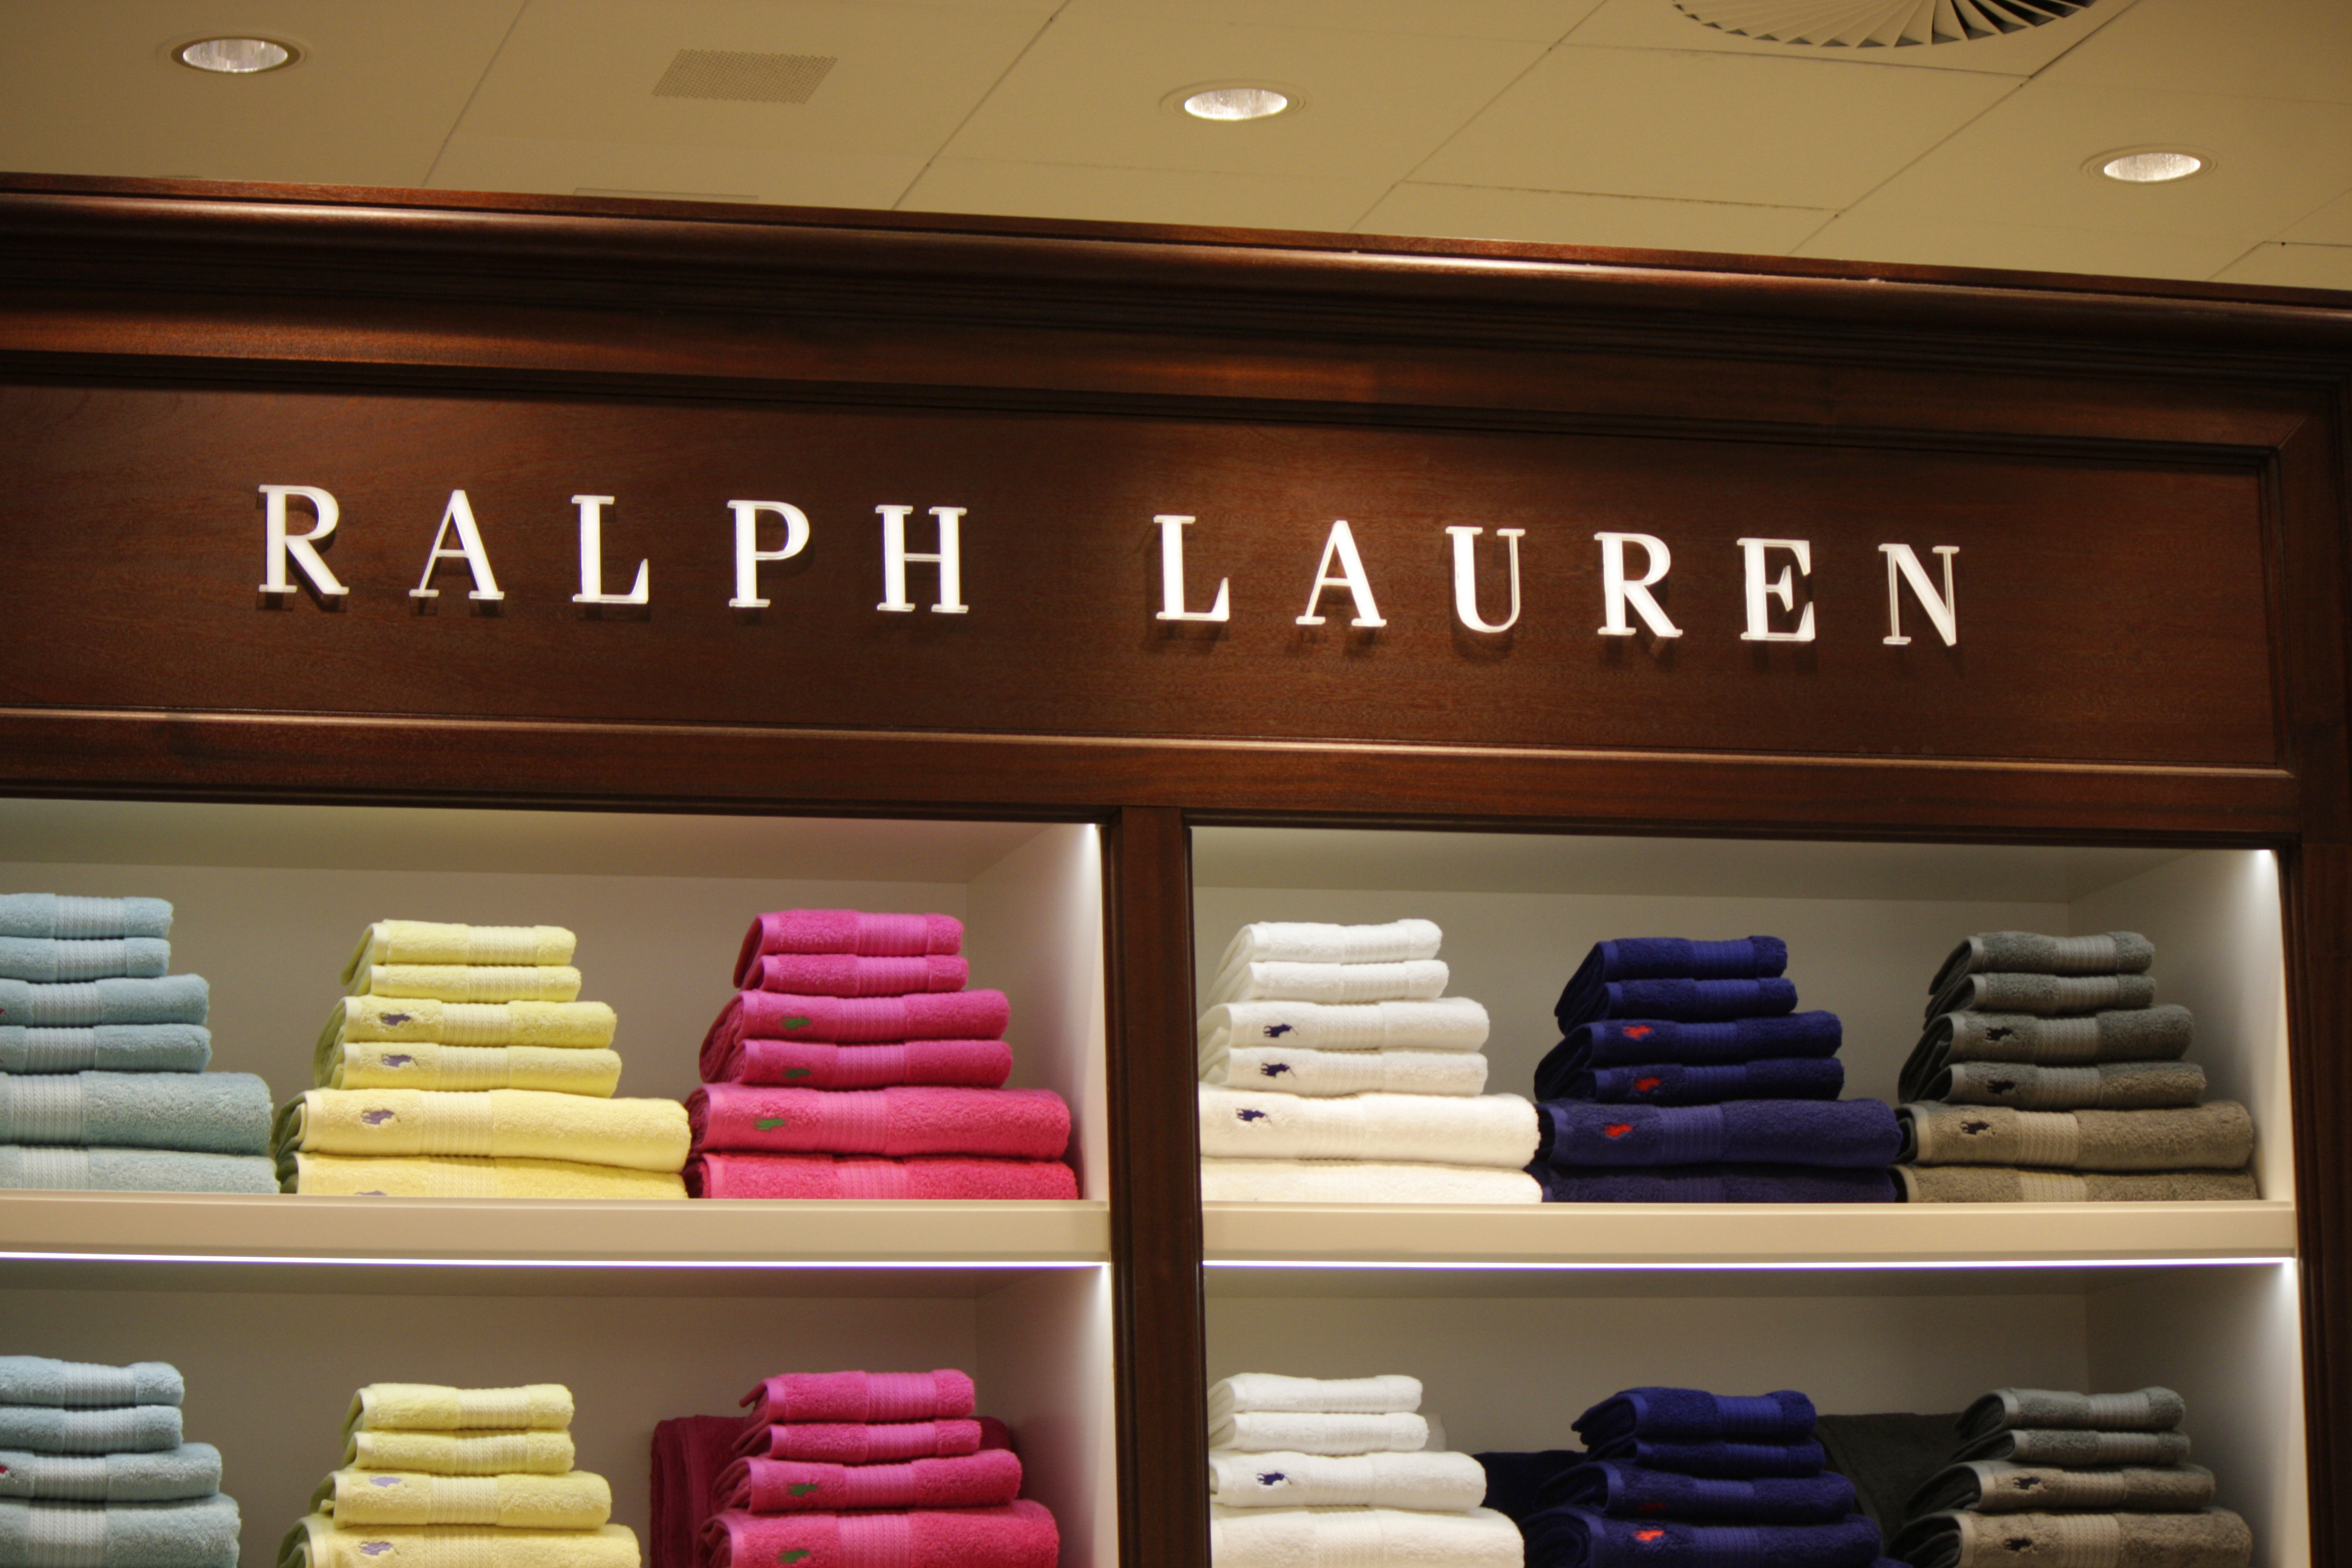 Entire Store Savings Event at Polo Ralph Lauren! Now – 12/1, enjoy 50% off*  all apparel. *Exclusions may apply. See store for details.